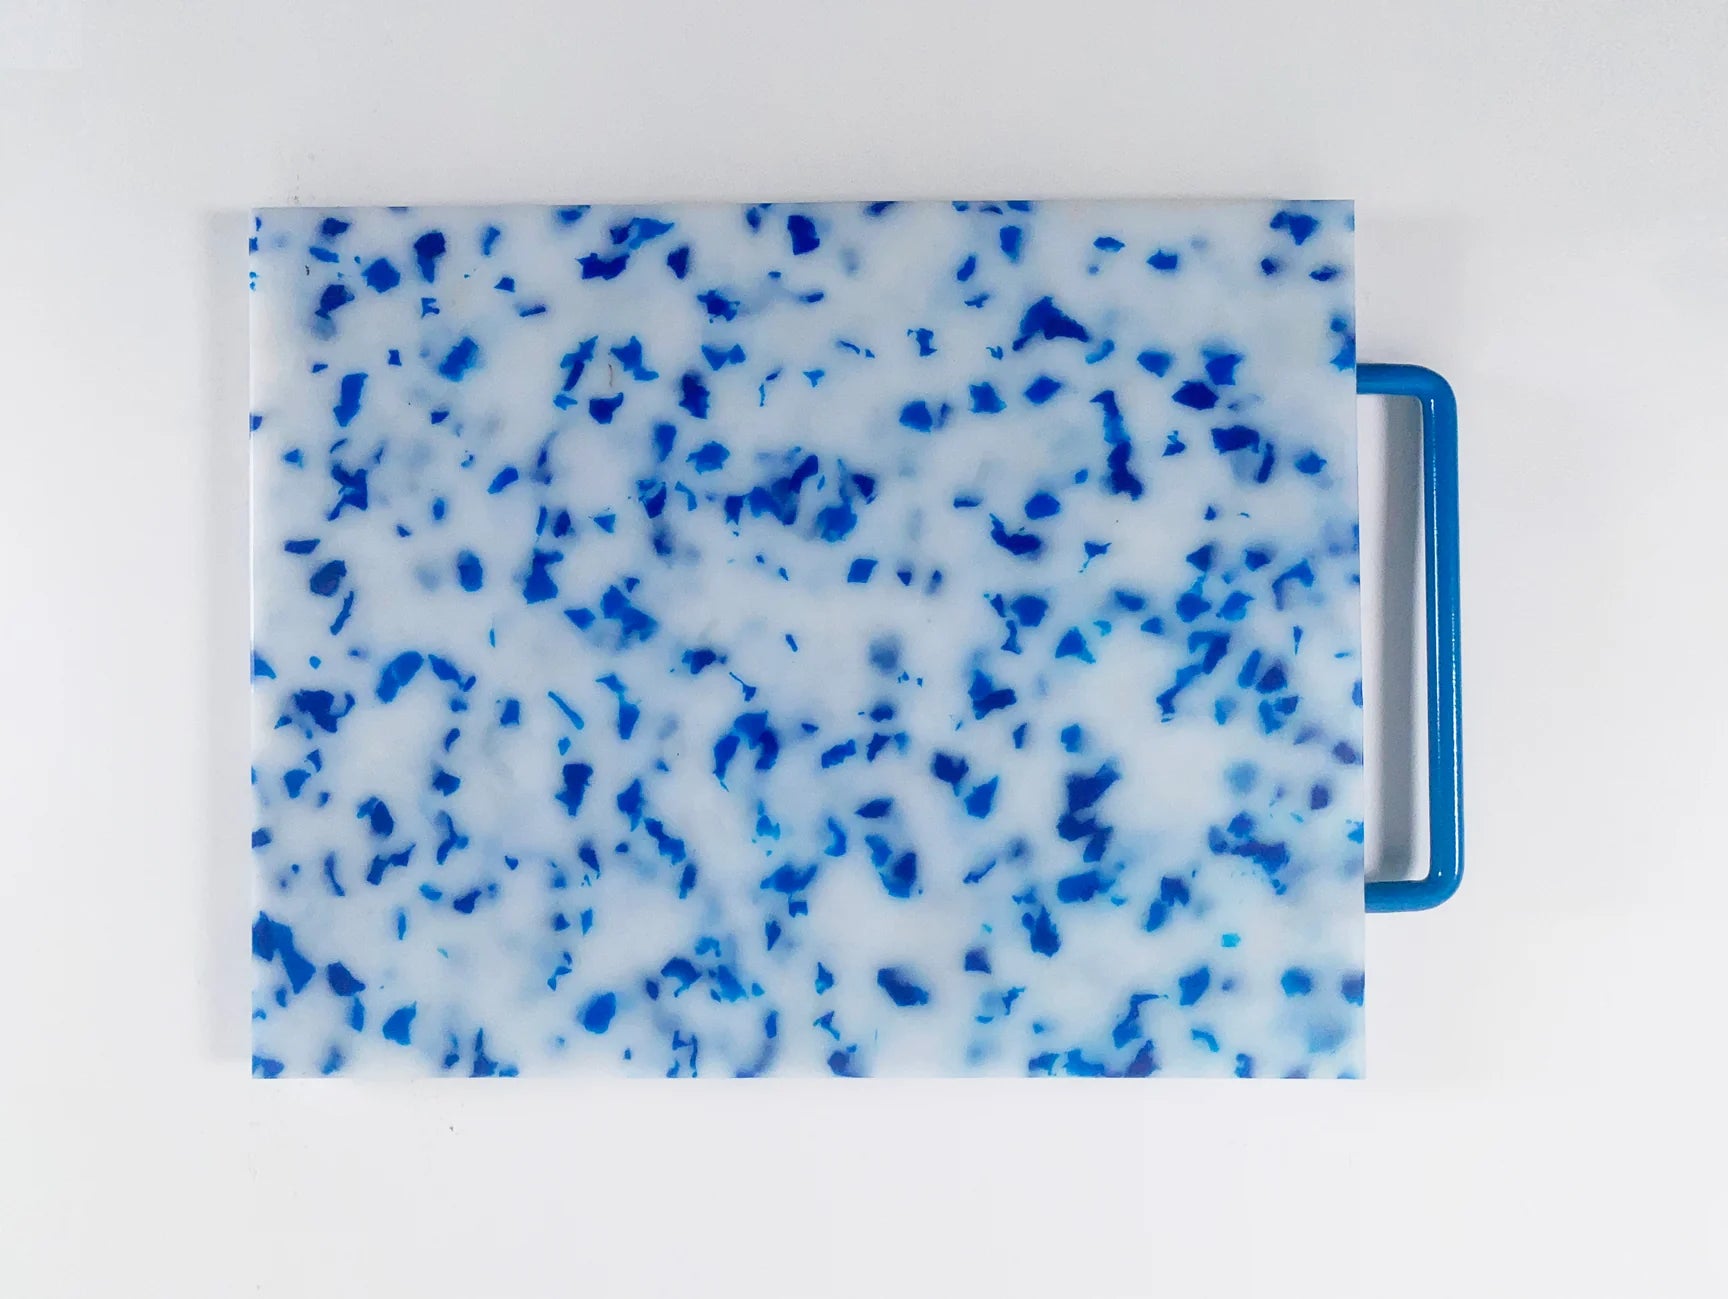 FREDERICKS AND MAE CUTTING BOARD IN BLUE AND WHITE